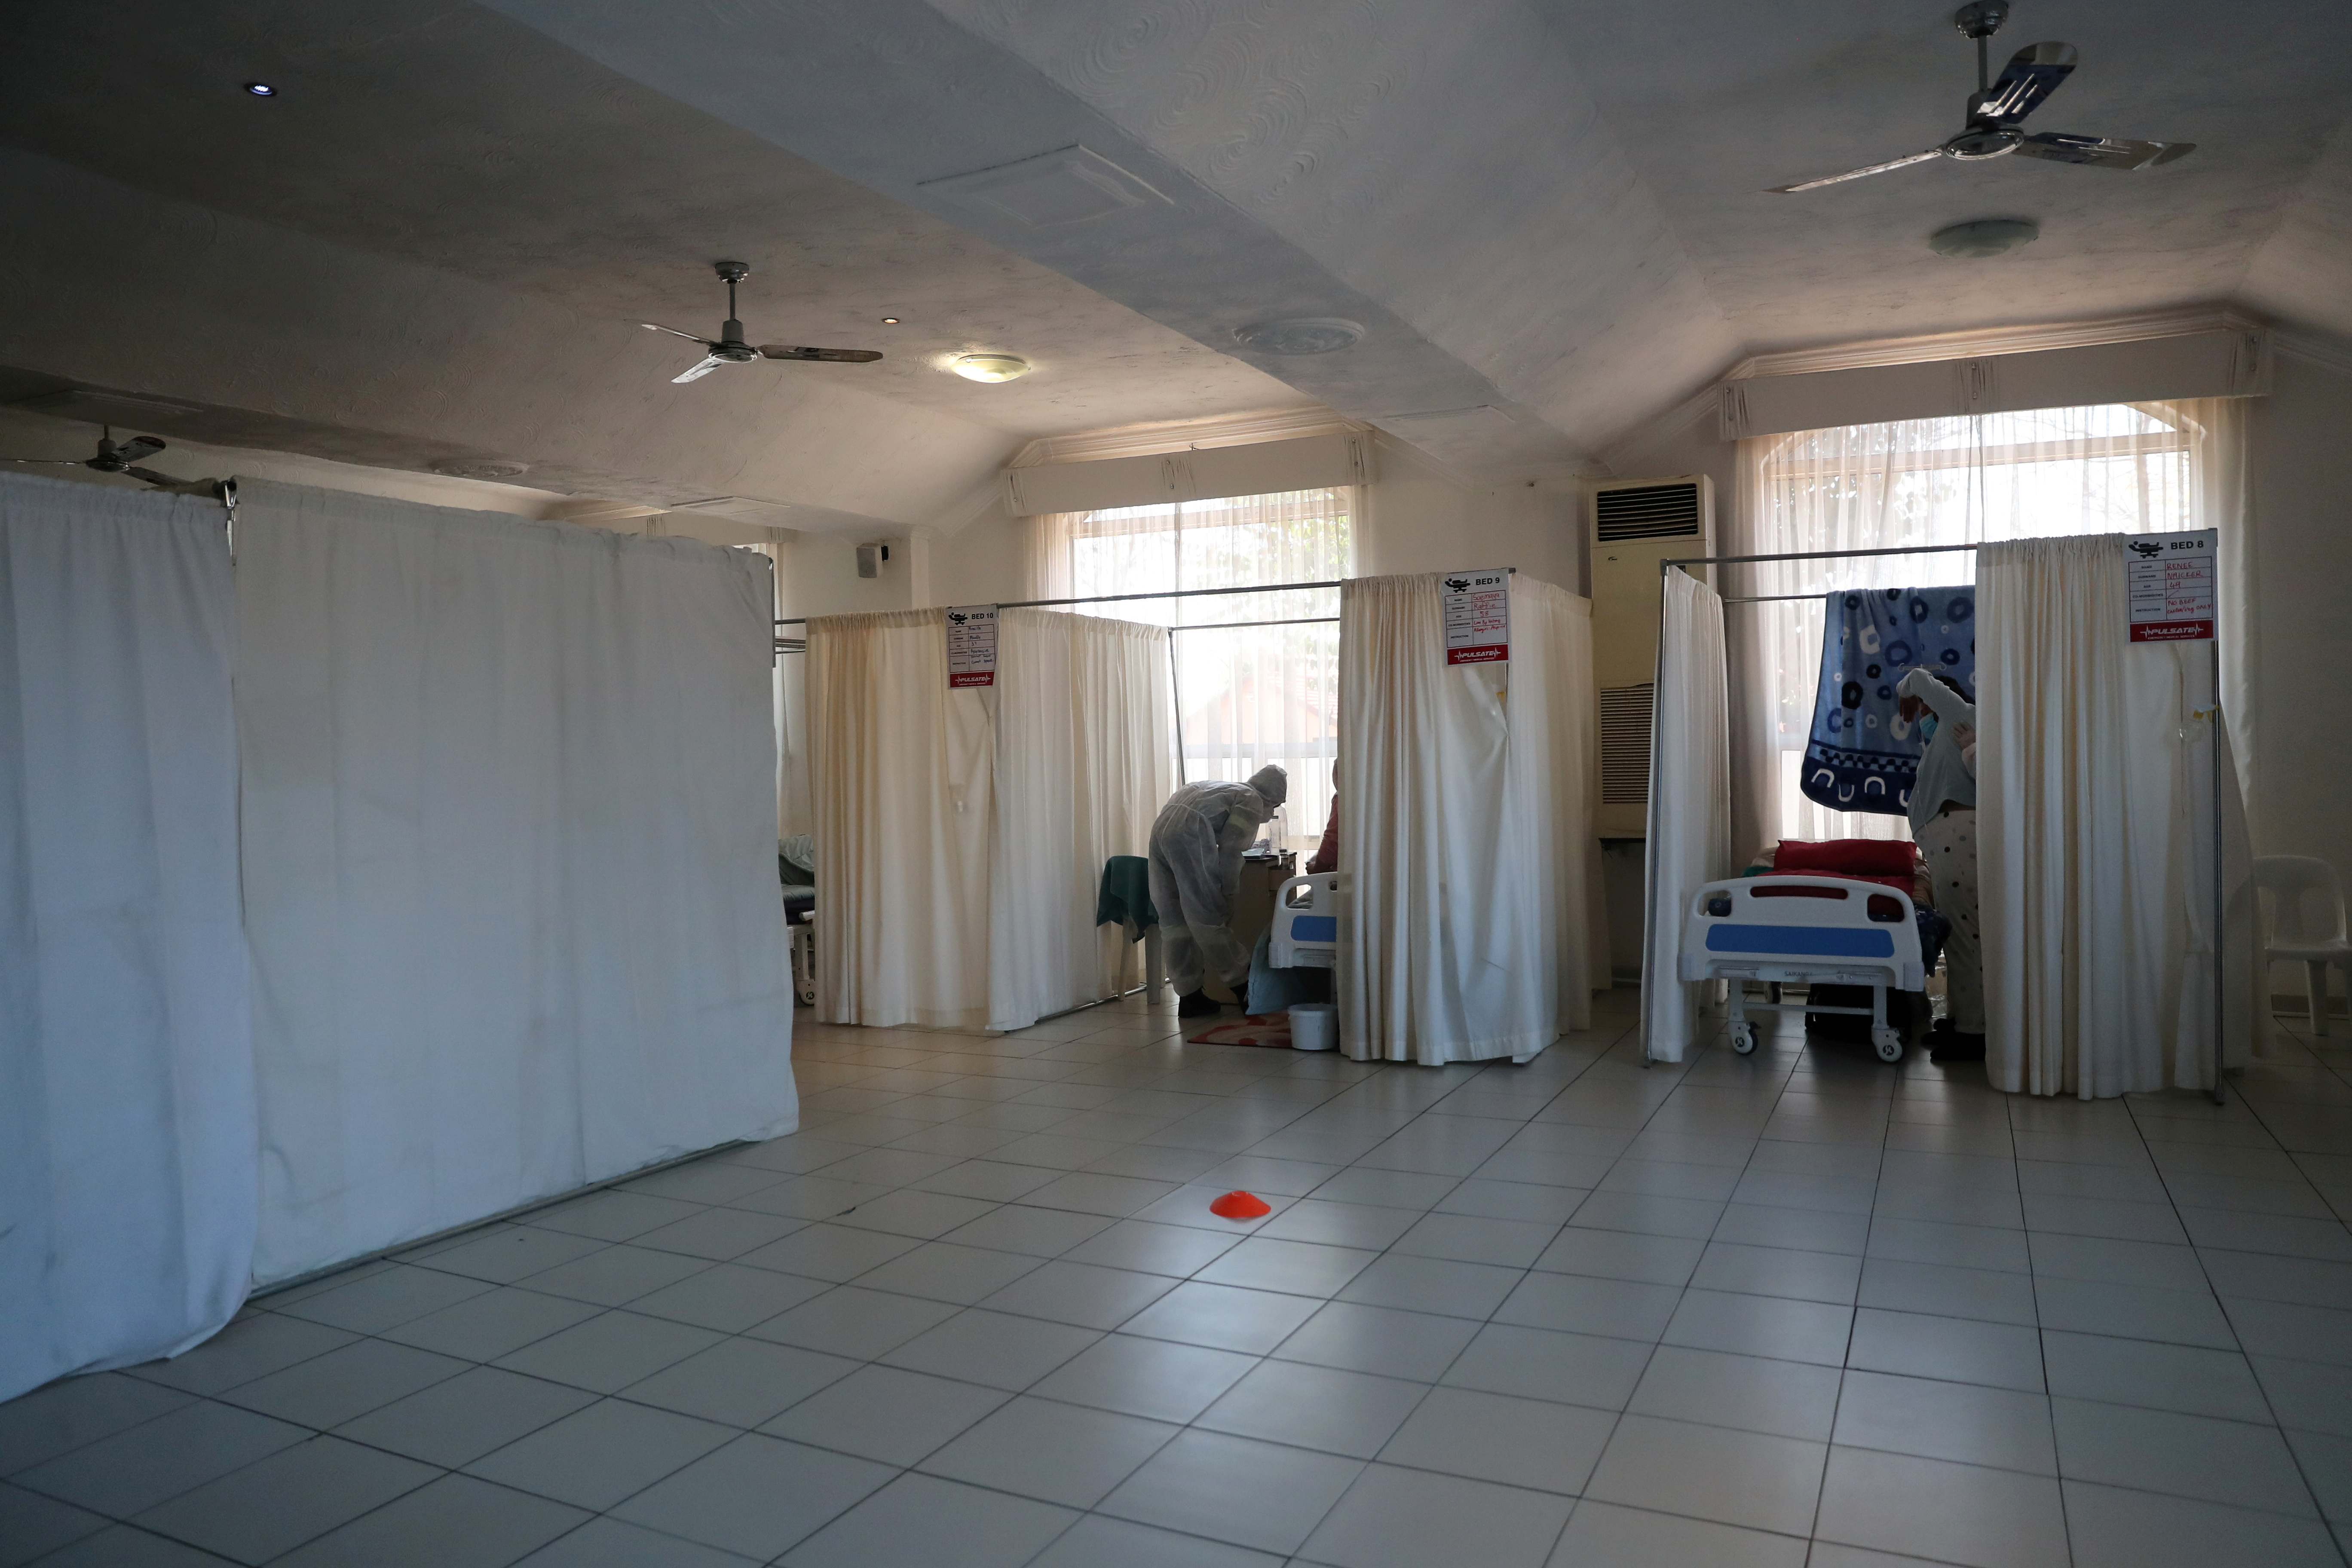 Healthcare workers assist patients being treated at a makeshift hospital run by charity organisation The Gift of the Givers, during the coronavirus disease (COVID-19) outbreak in Johannesburg